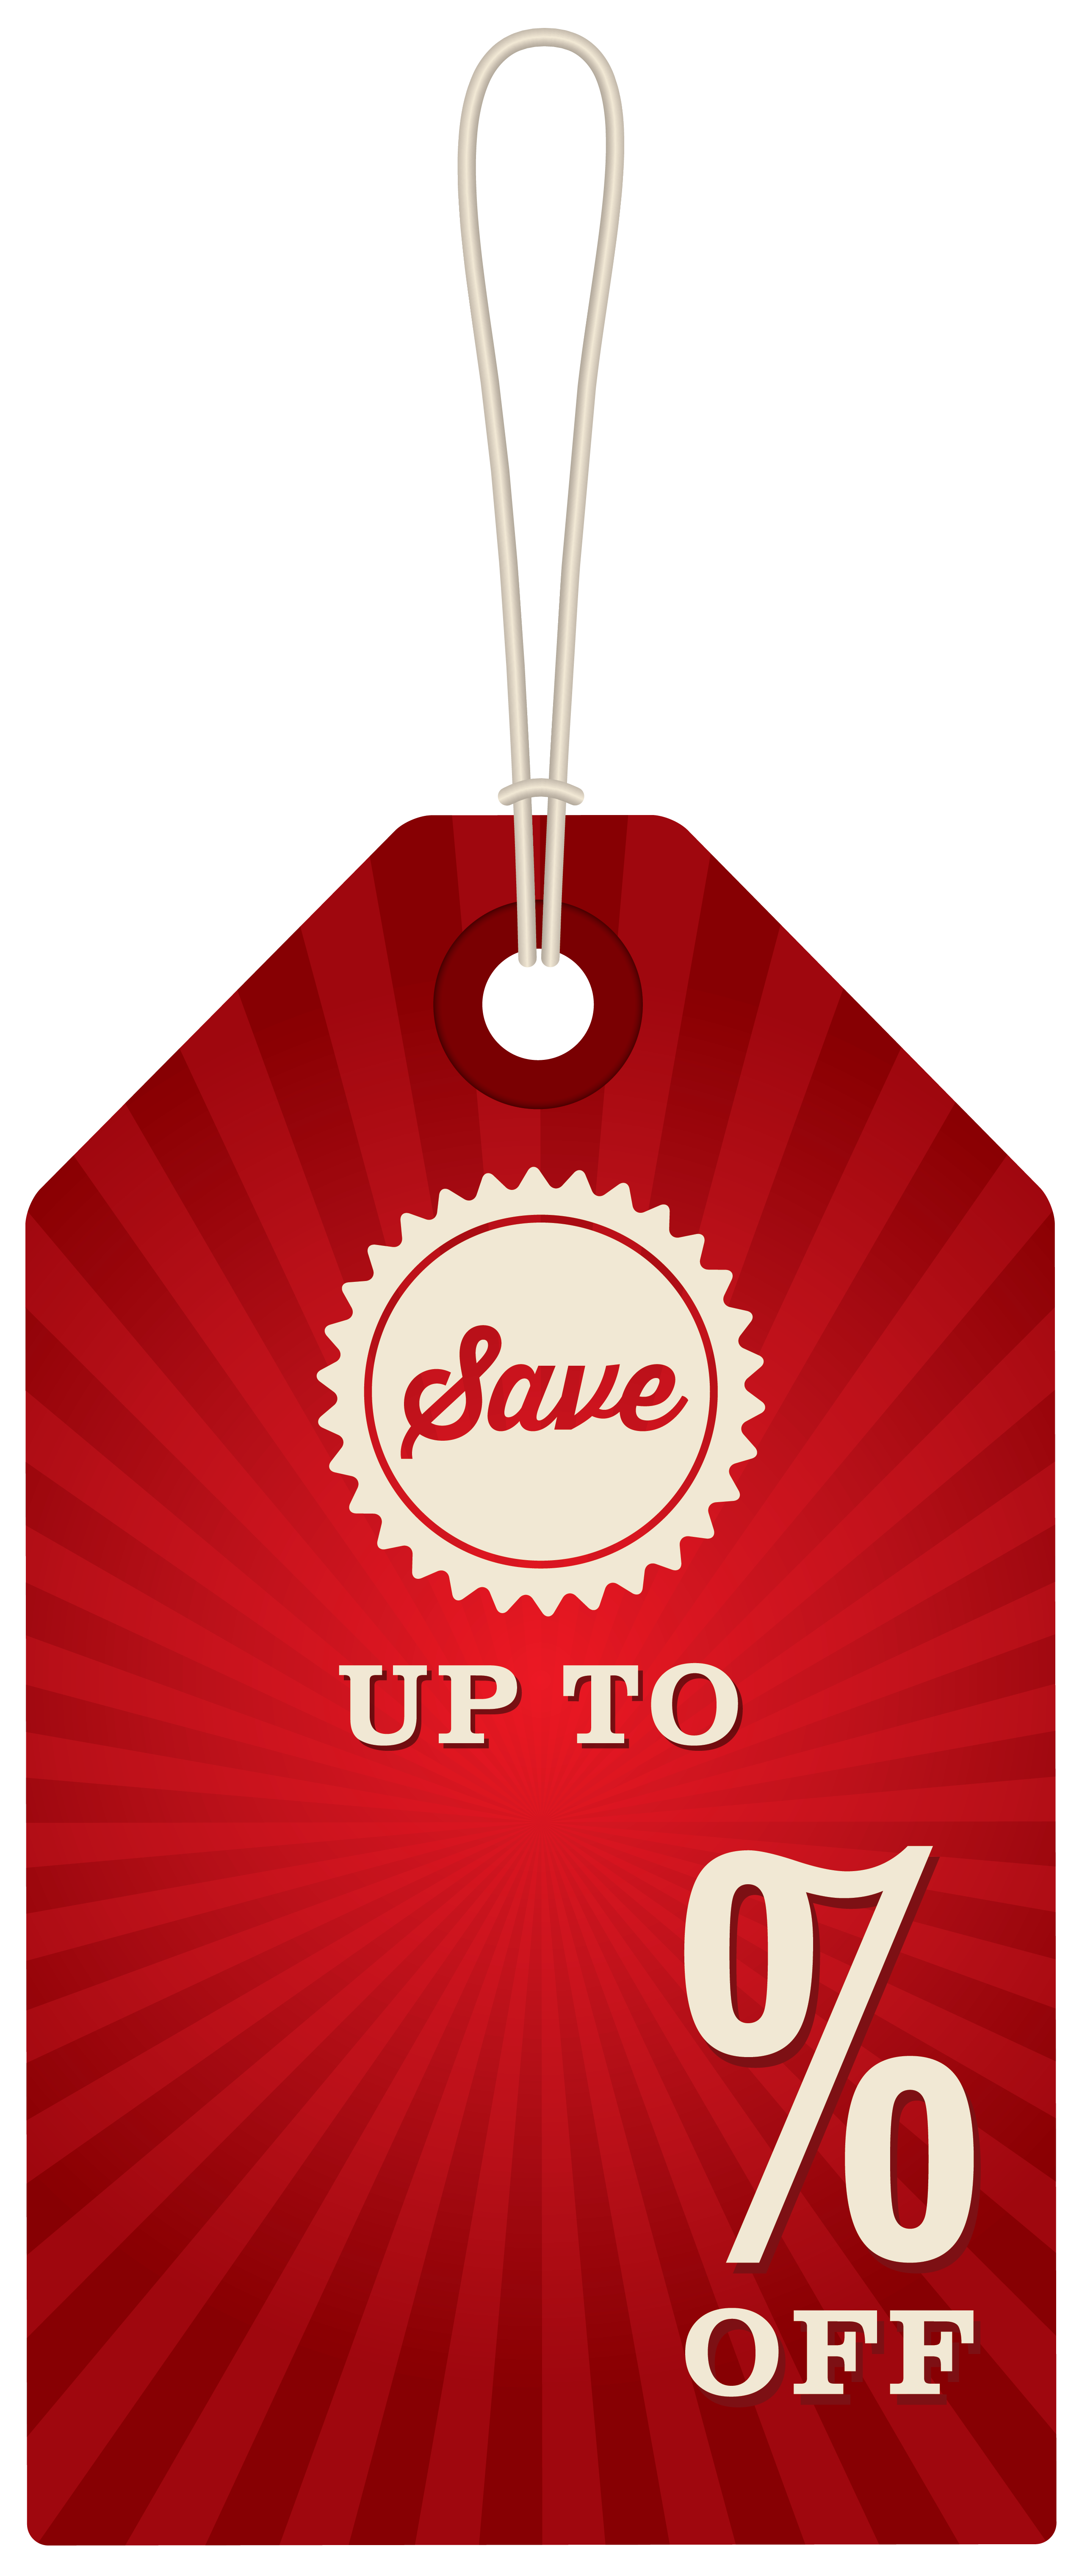 Discount Sales Label HD Image Free PNG PNG Image